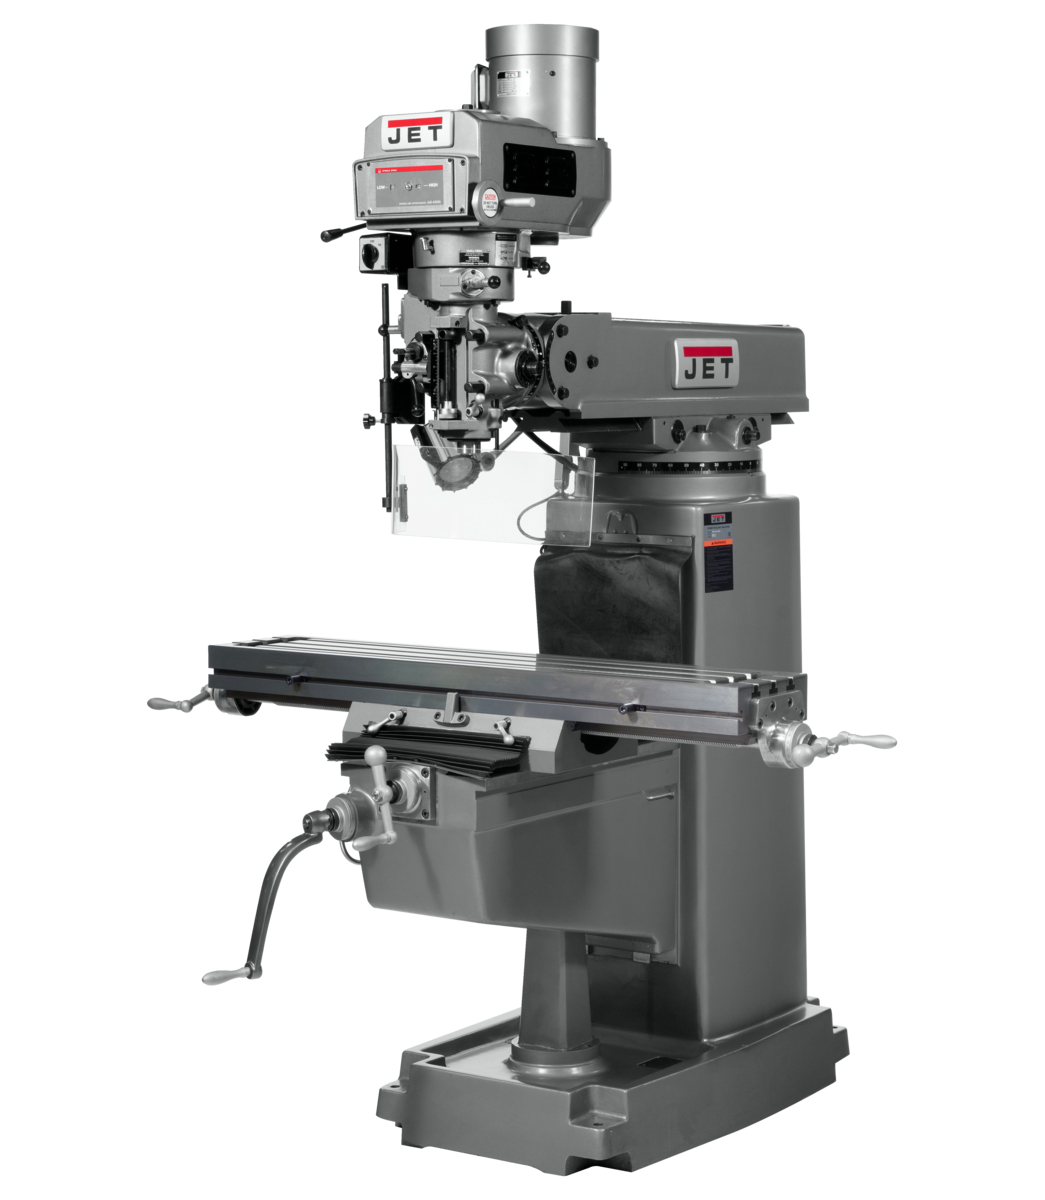 JTM-1050VS2 Mill With 3-Axis Newall DP700 DRO (Quill) With X, Y and Z-Axis Powerfeeds And Power Draw Bar